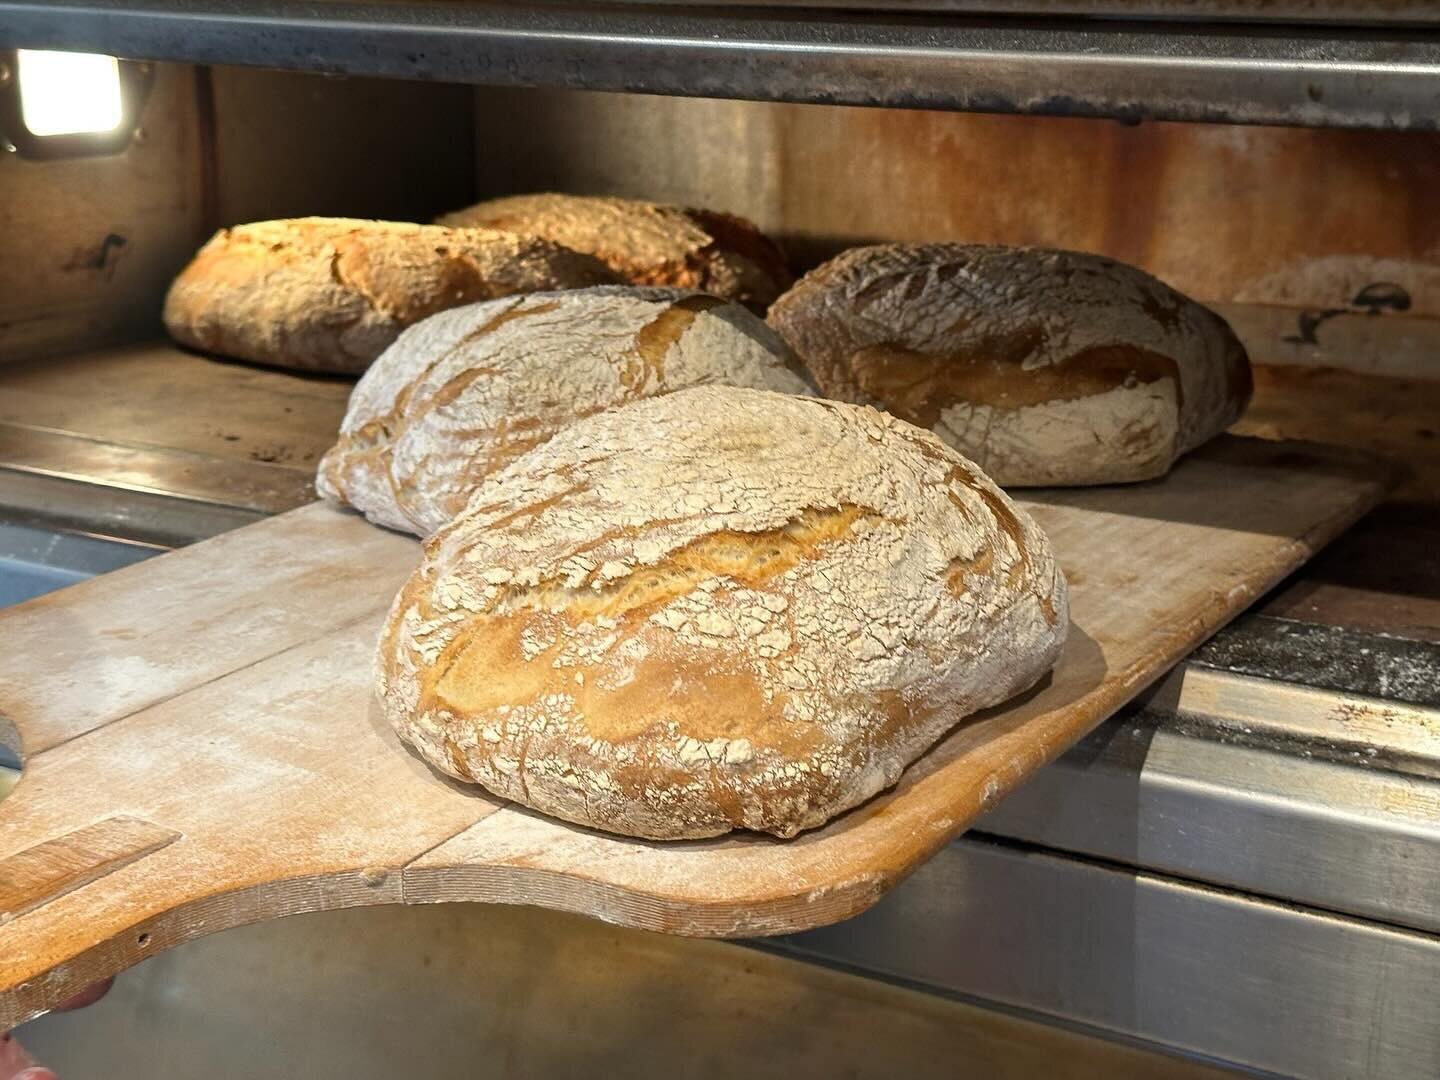 Freshly baked and ready to conquer your taste buds! 🥖✨ 

#breadheaven #freshlybaked #bakeryonthewater #bourtononthewater #cotswoldslife #discovercotswolds #cotswolds_culture